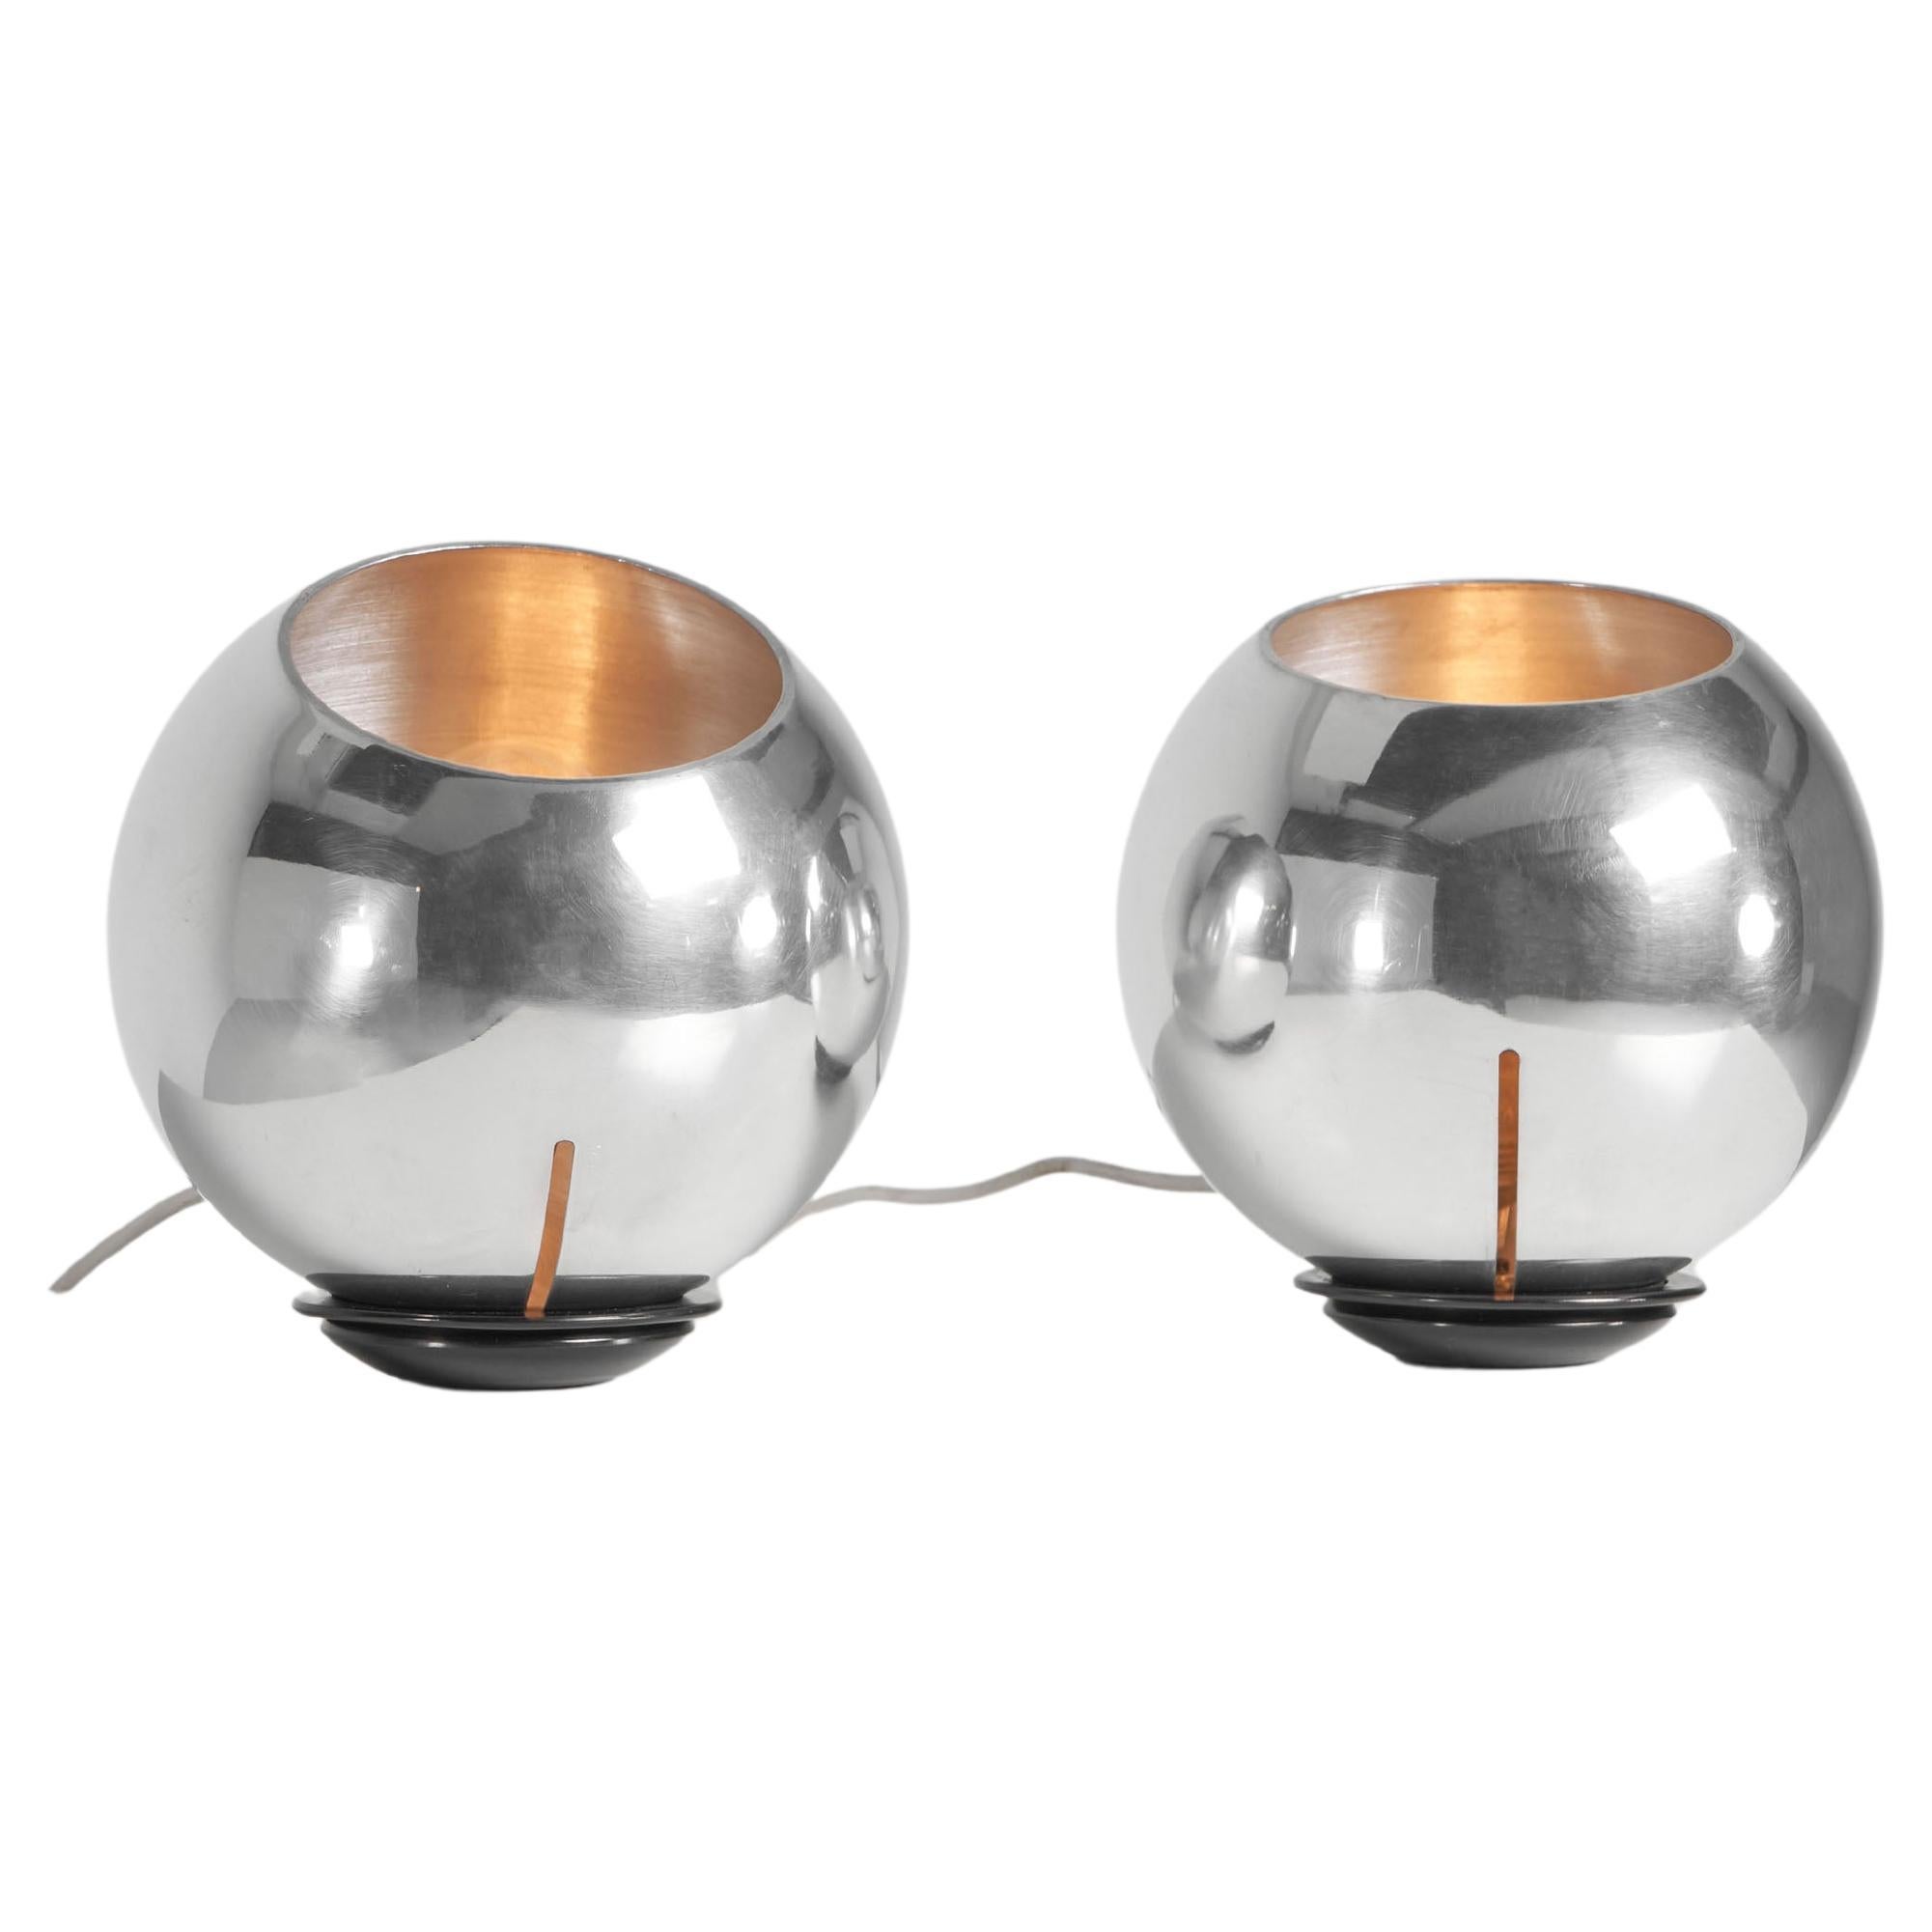 Nice playful pair of adjustable table lamps designed by Gino Sarfatti and manufactured by Arteluce, Italy 1962. Sheared off sphere-shaped reflector in polished aluminium simply supported on an iron weighted base in painted finish black. Round